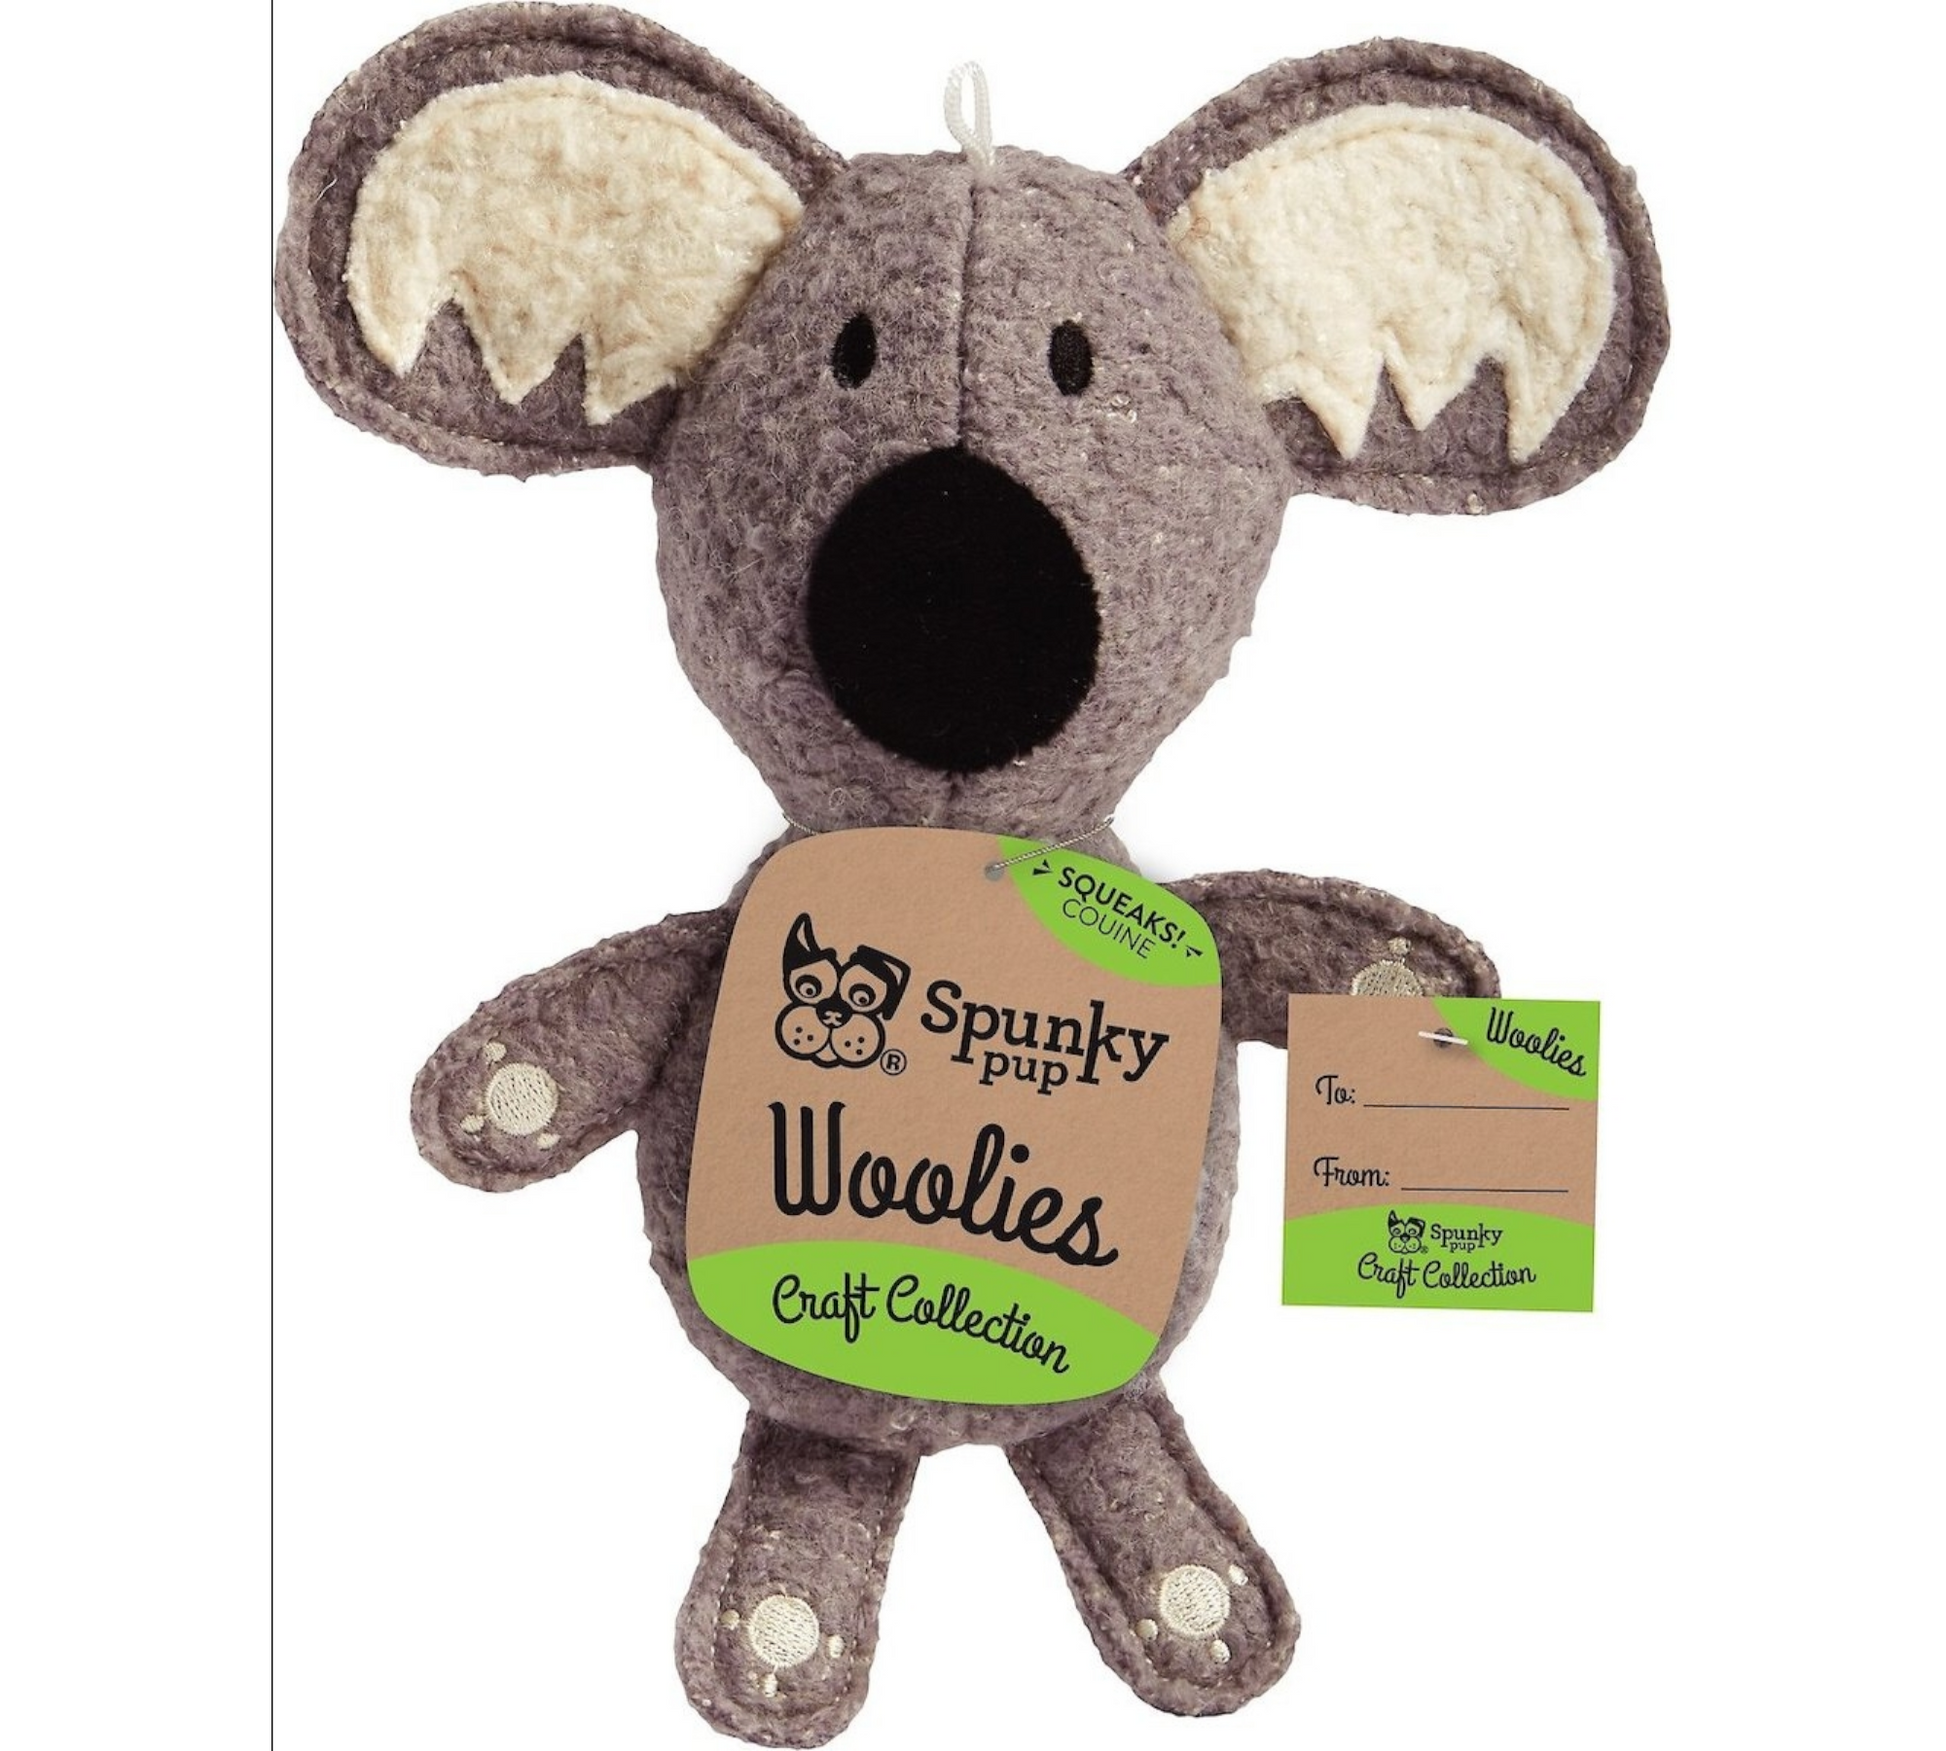 Canine's World Plush Toys Spunky Pup Woolies Craft Collection Koala Squeaky Plush Dog Toy Spunky Pup